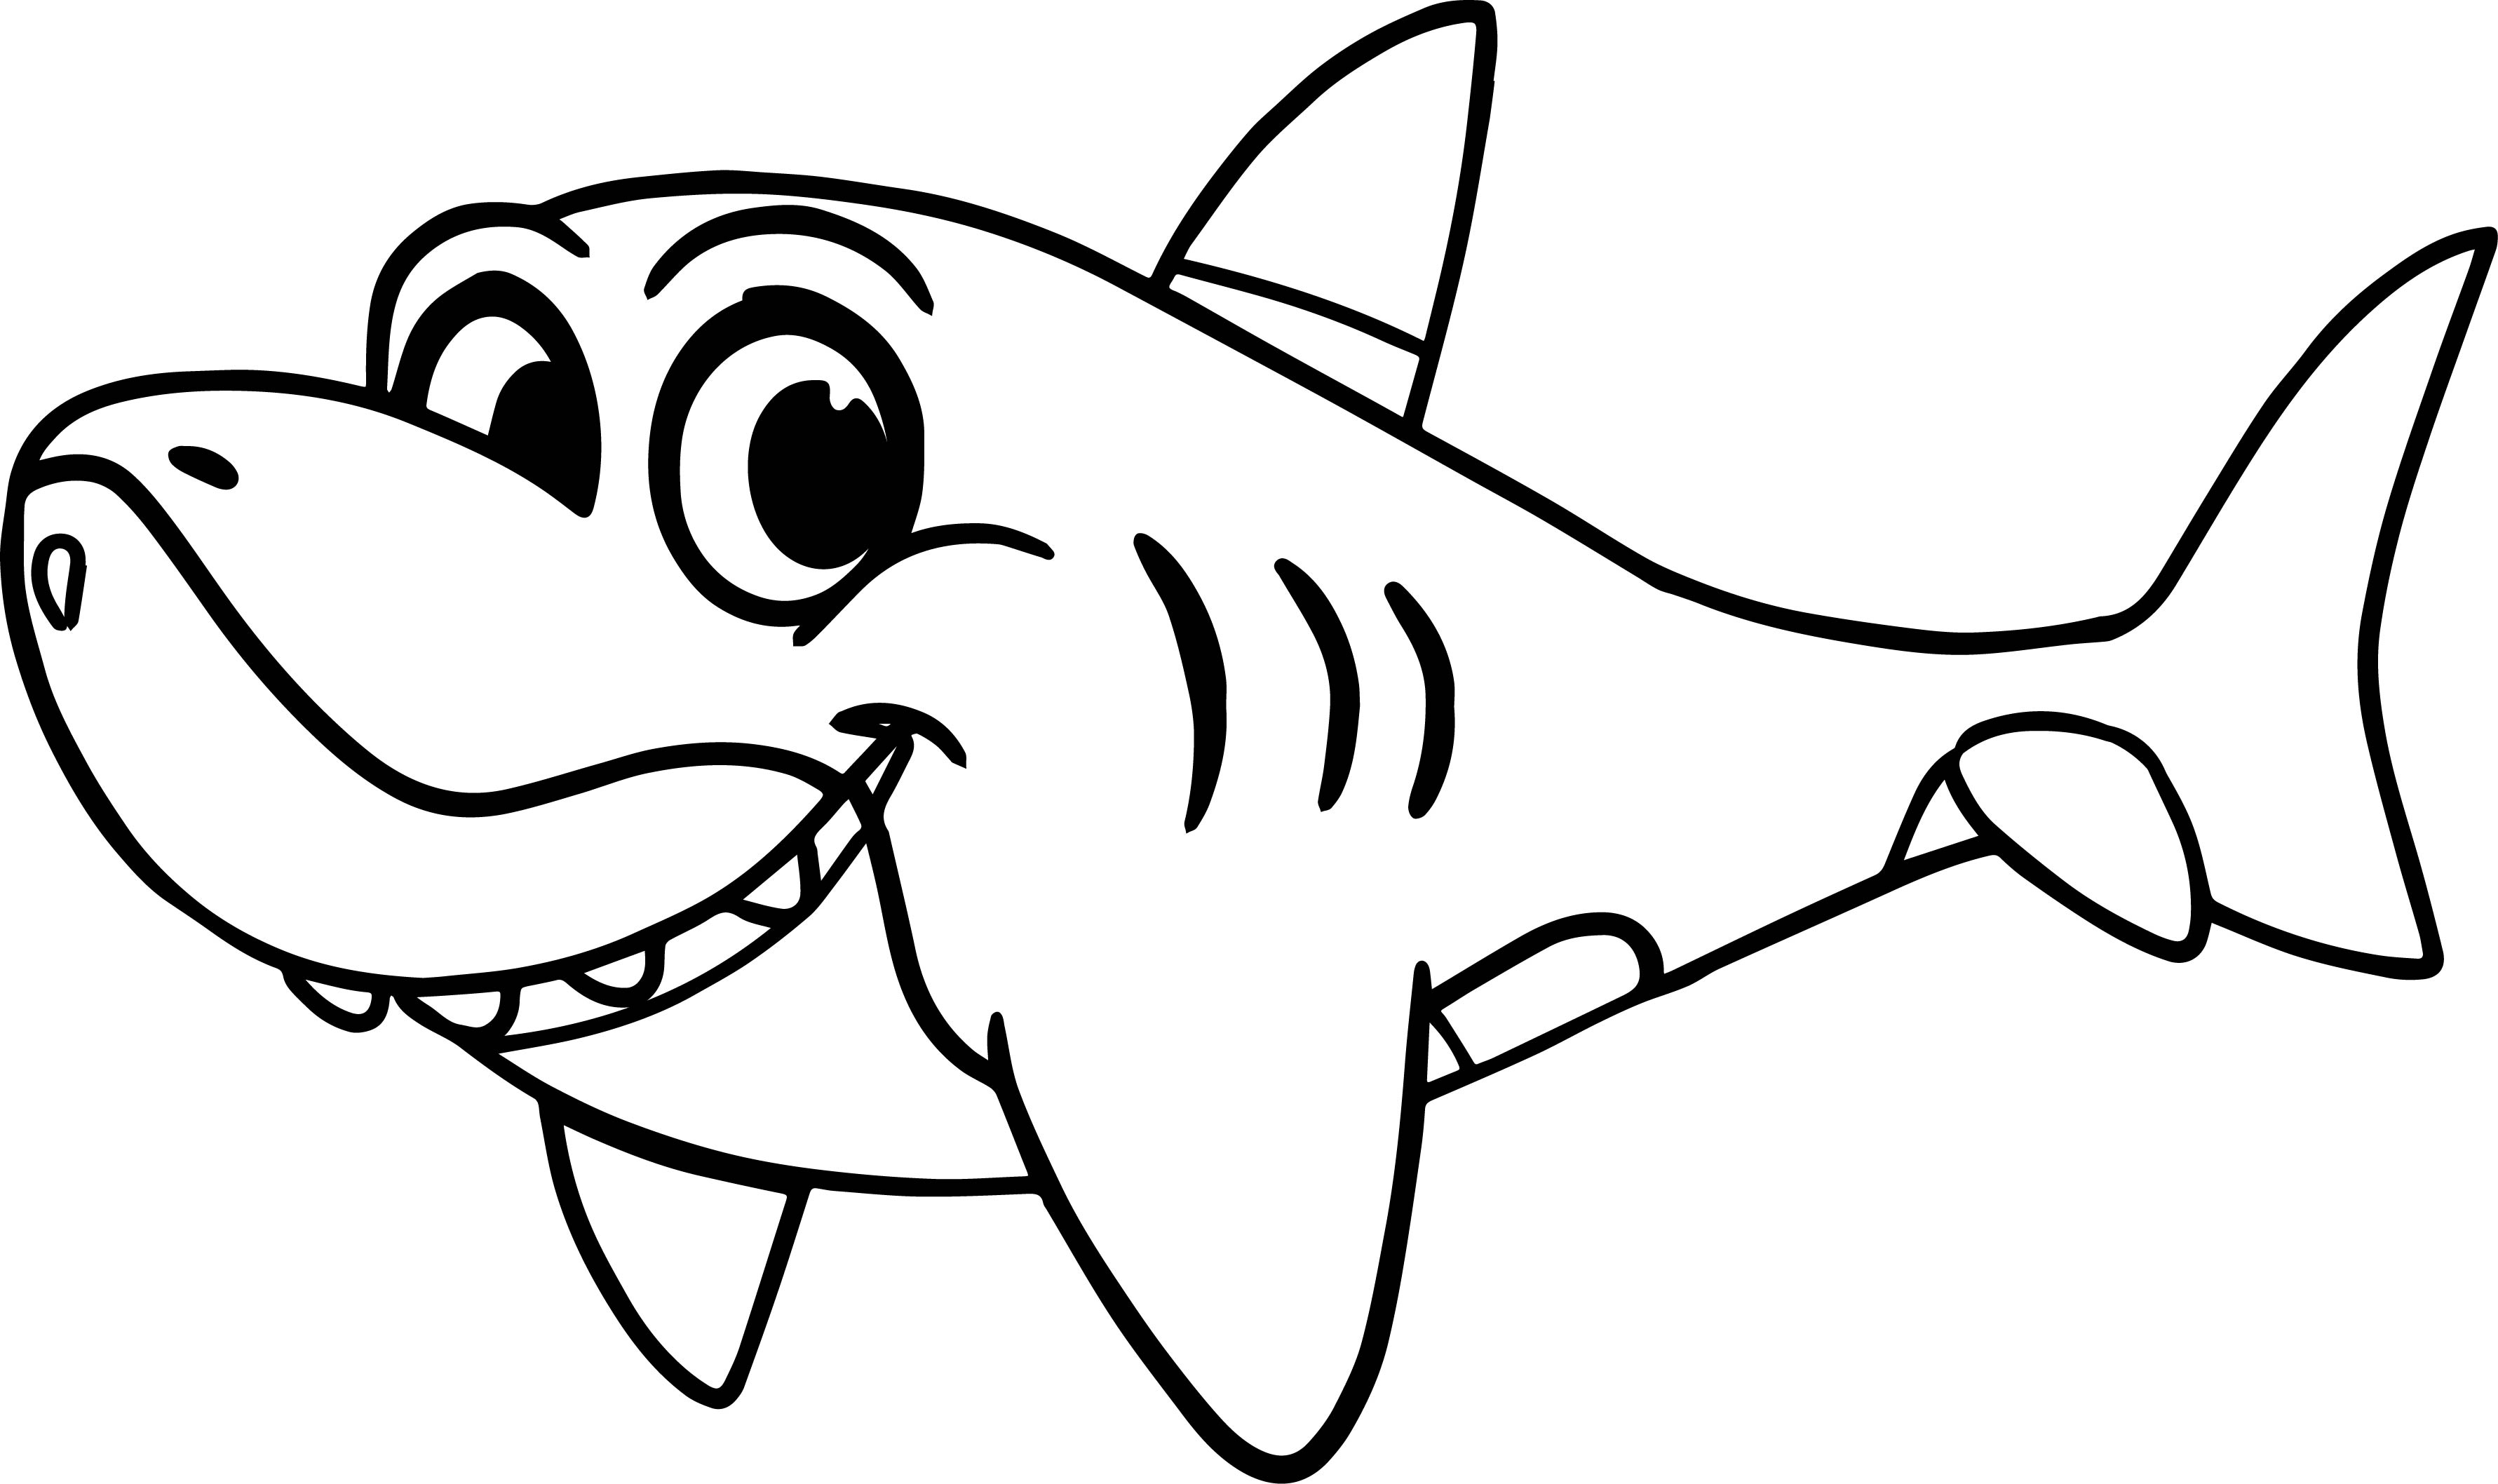 Coloring Pages Of J Coloring Pages Excelent Coloringages For Girlsdfrintable Shark